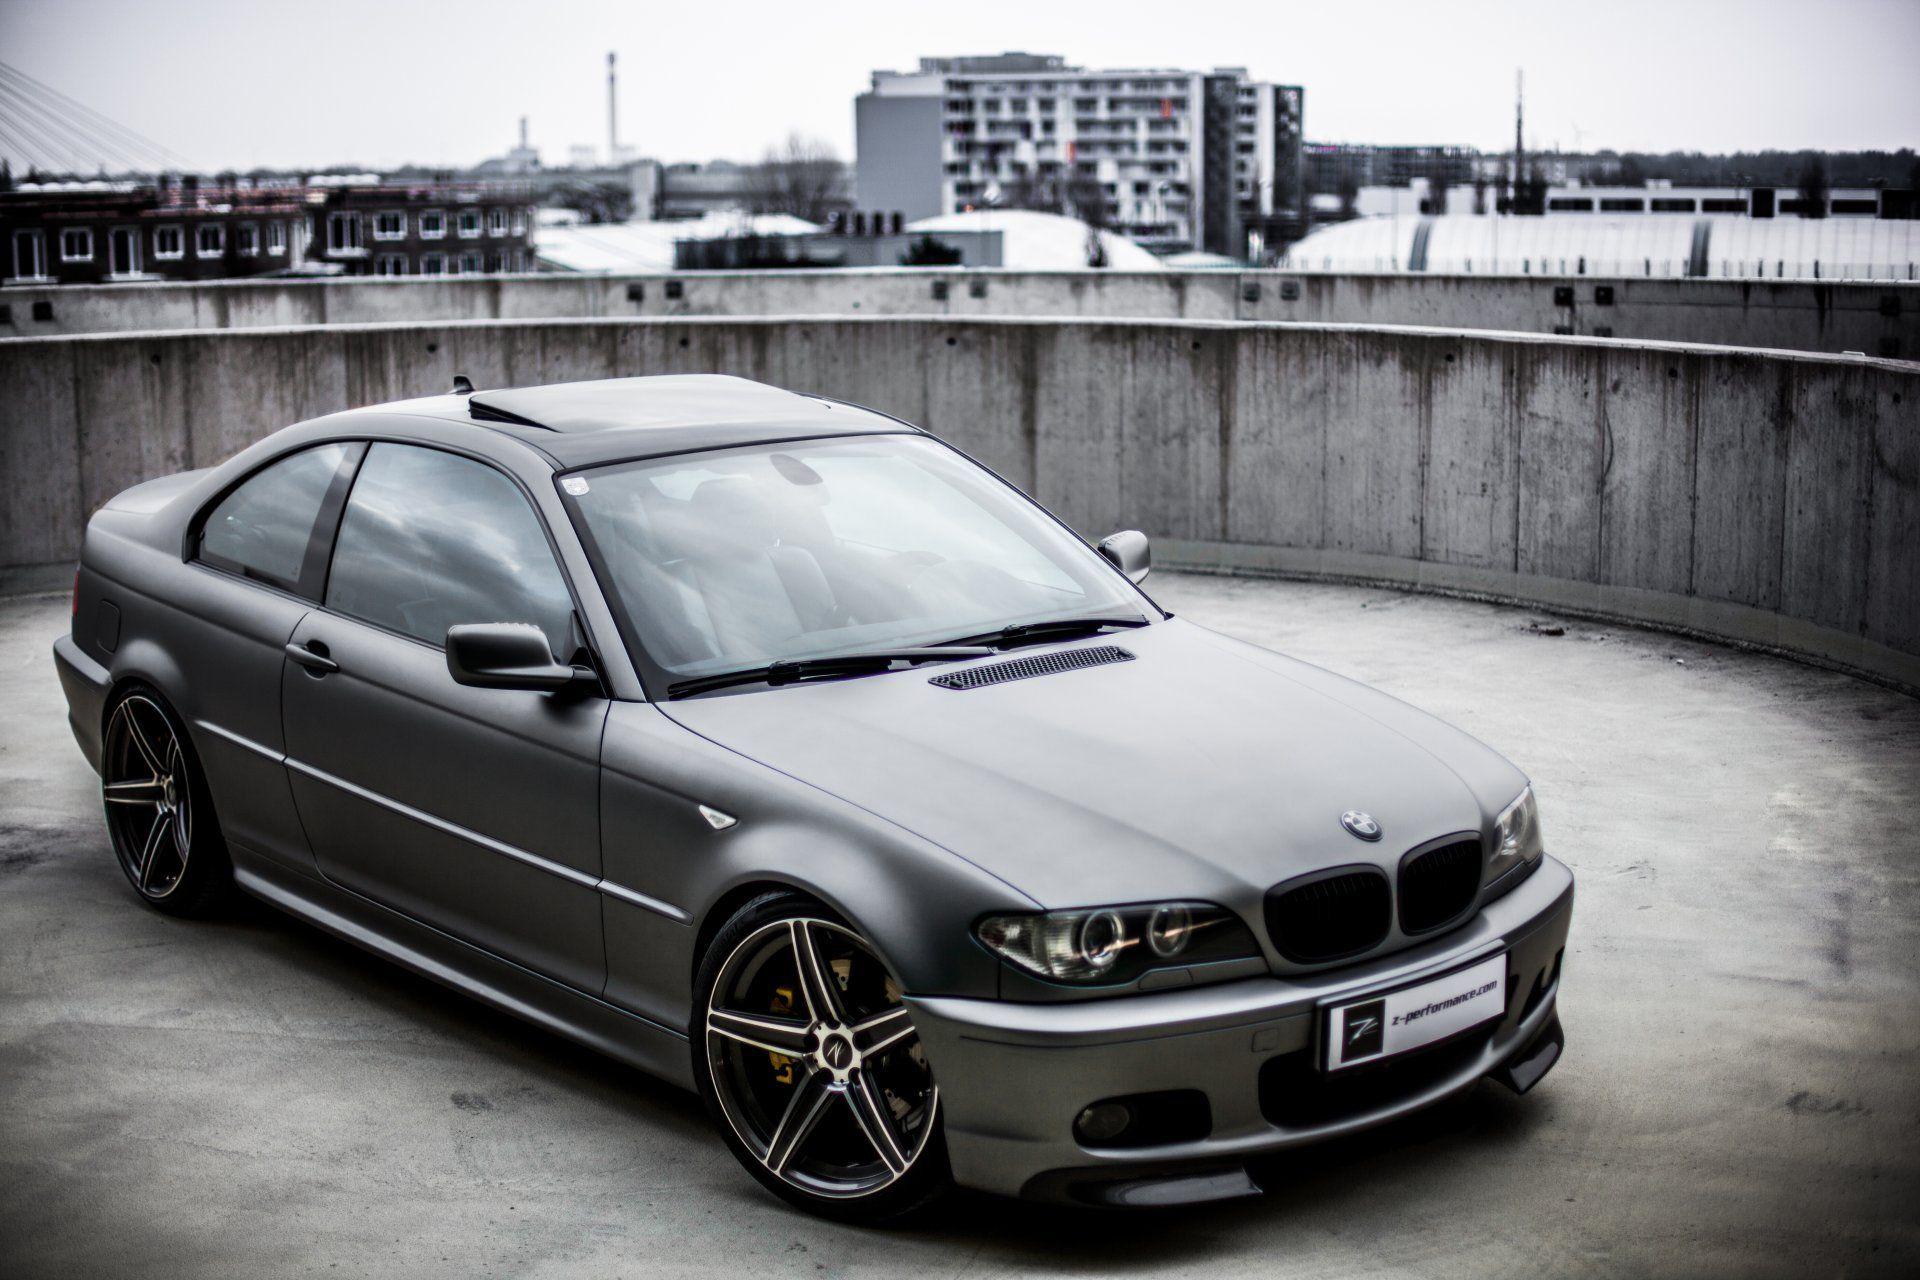 Bmw E46 Tuning Wallpapers Wallpaper Cave